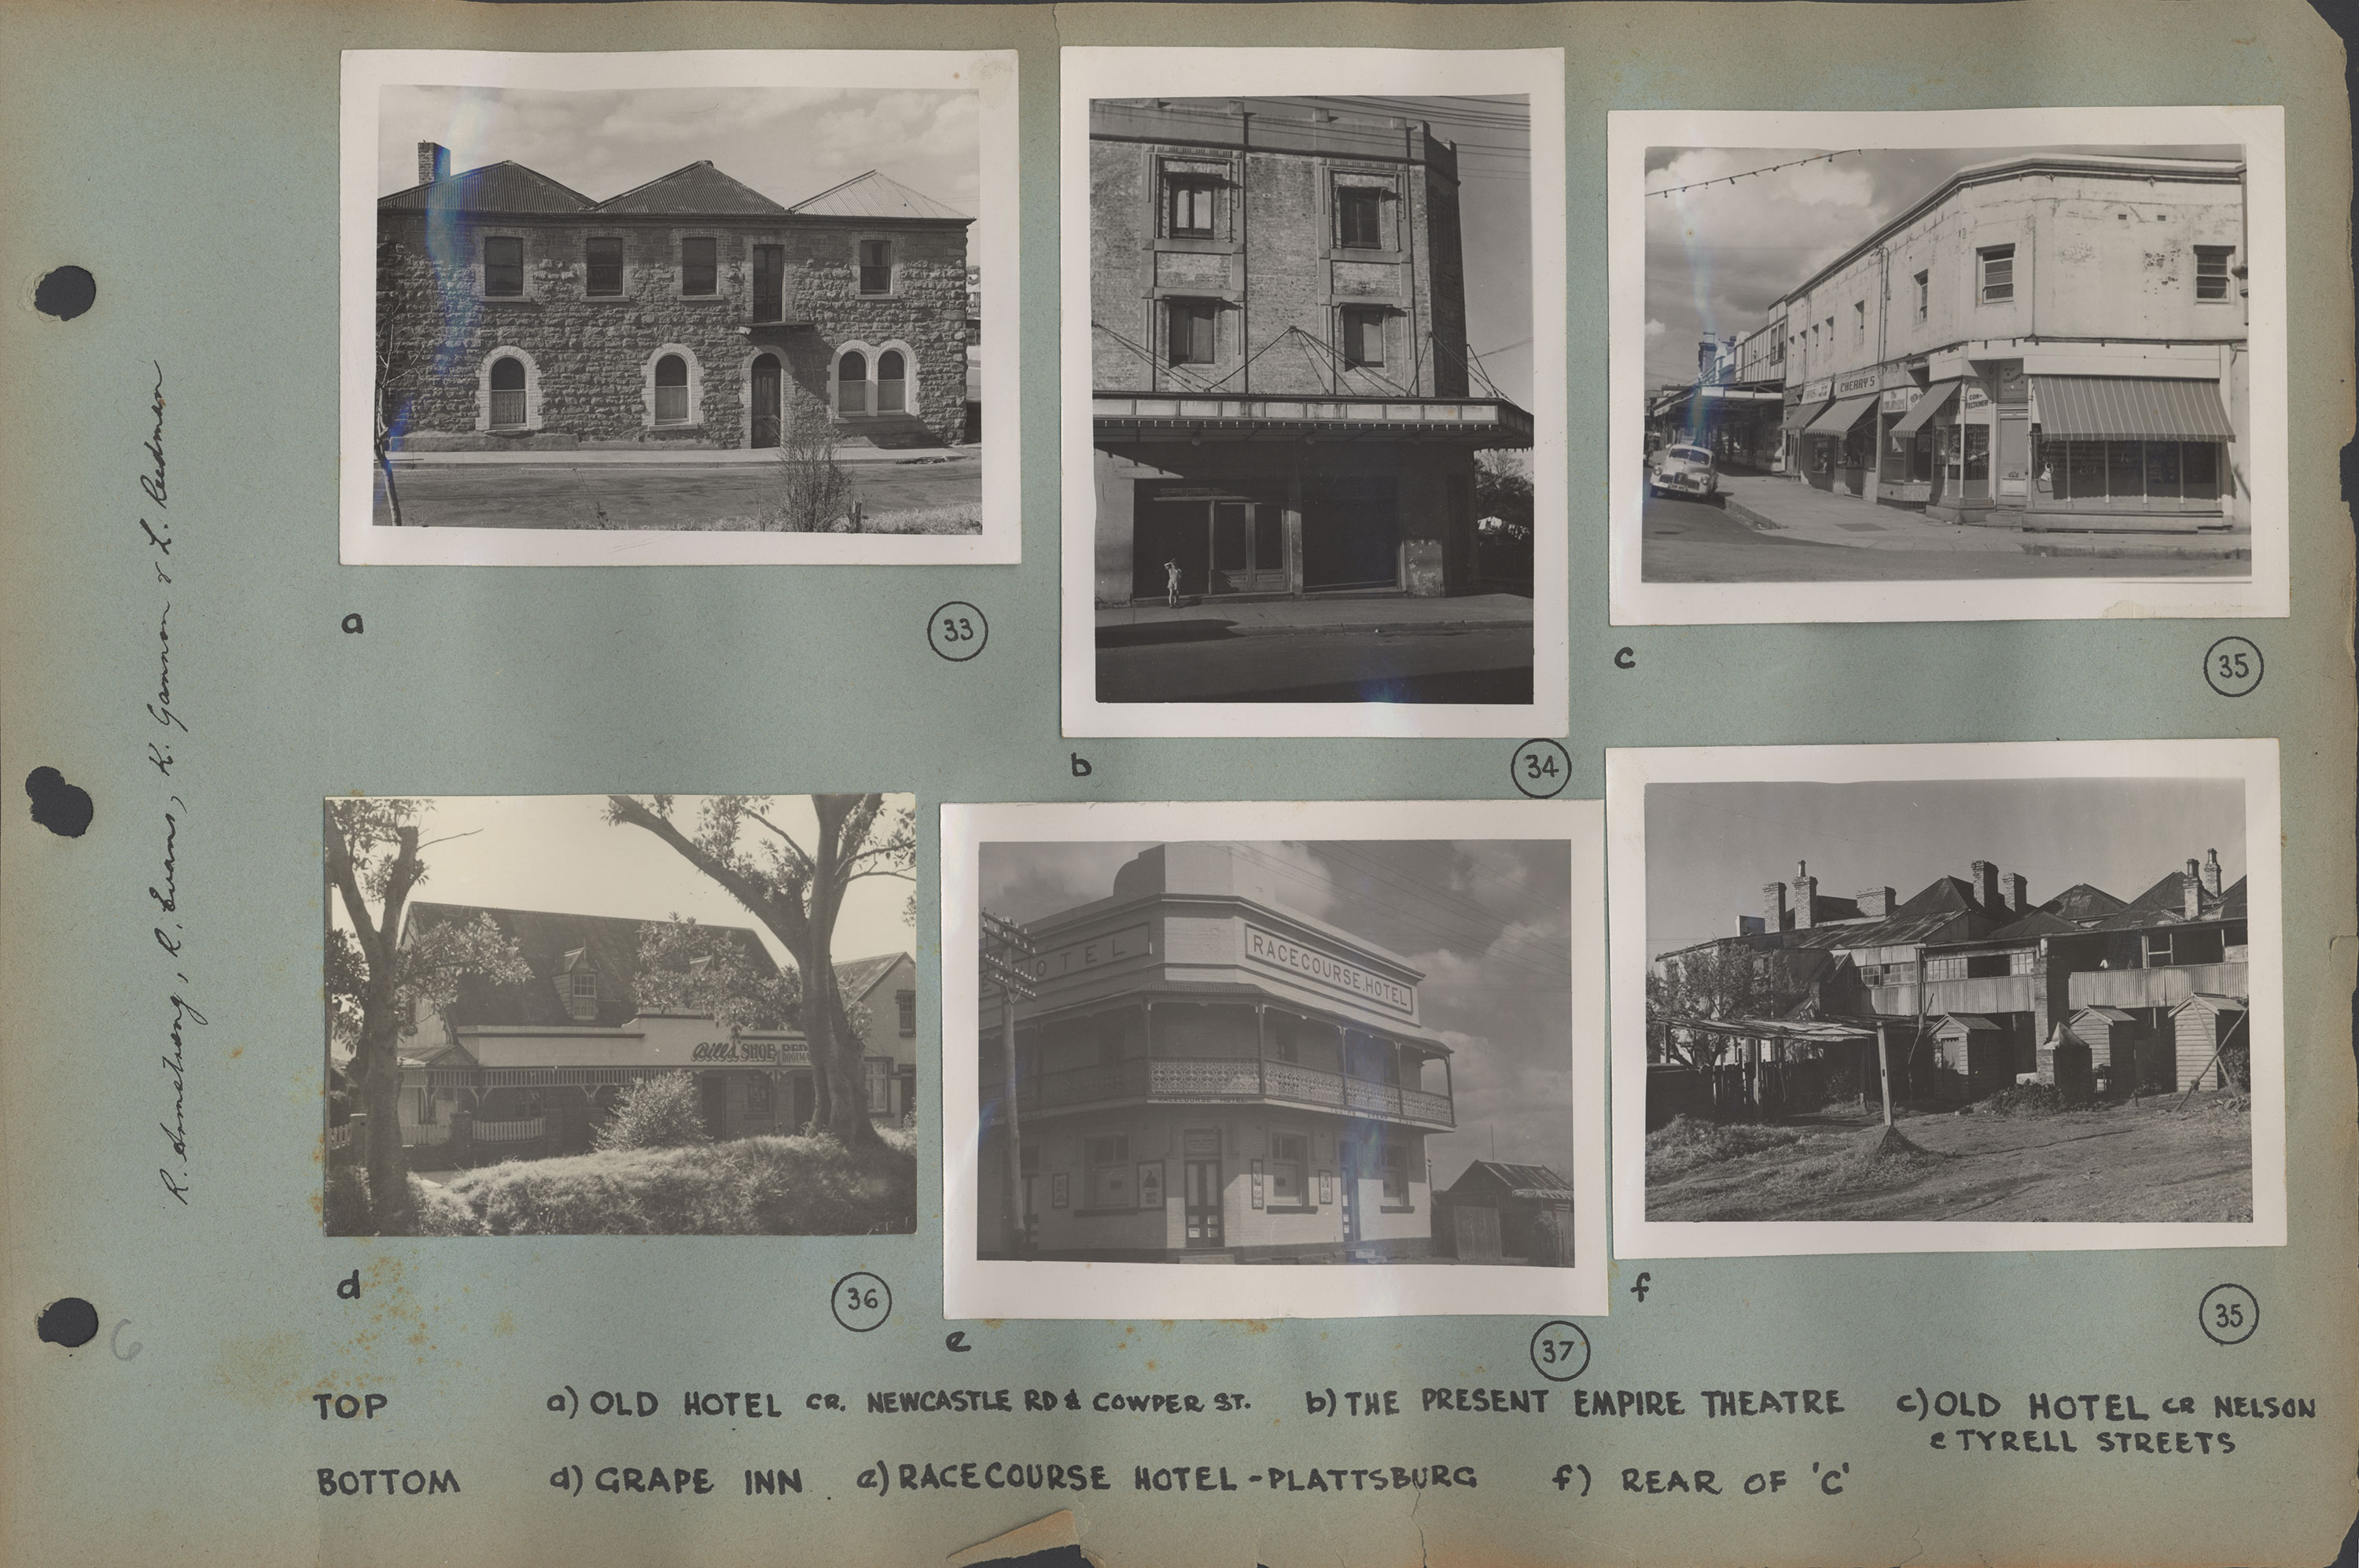 Sample page of photographs showing Old Hotels, Empire Theatre, Grape Inn and Racecourse Hotel